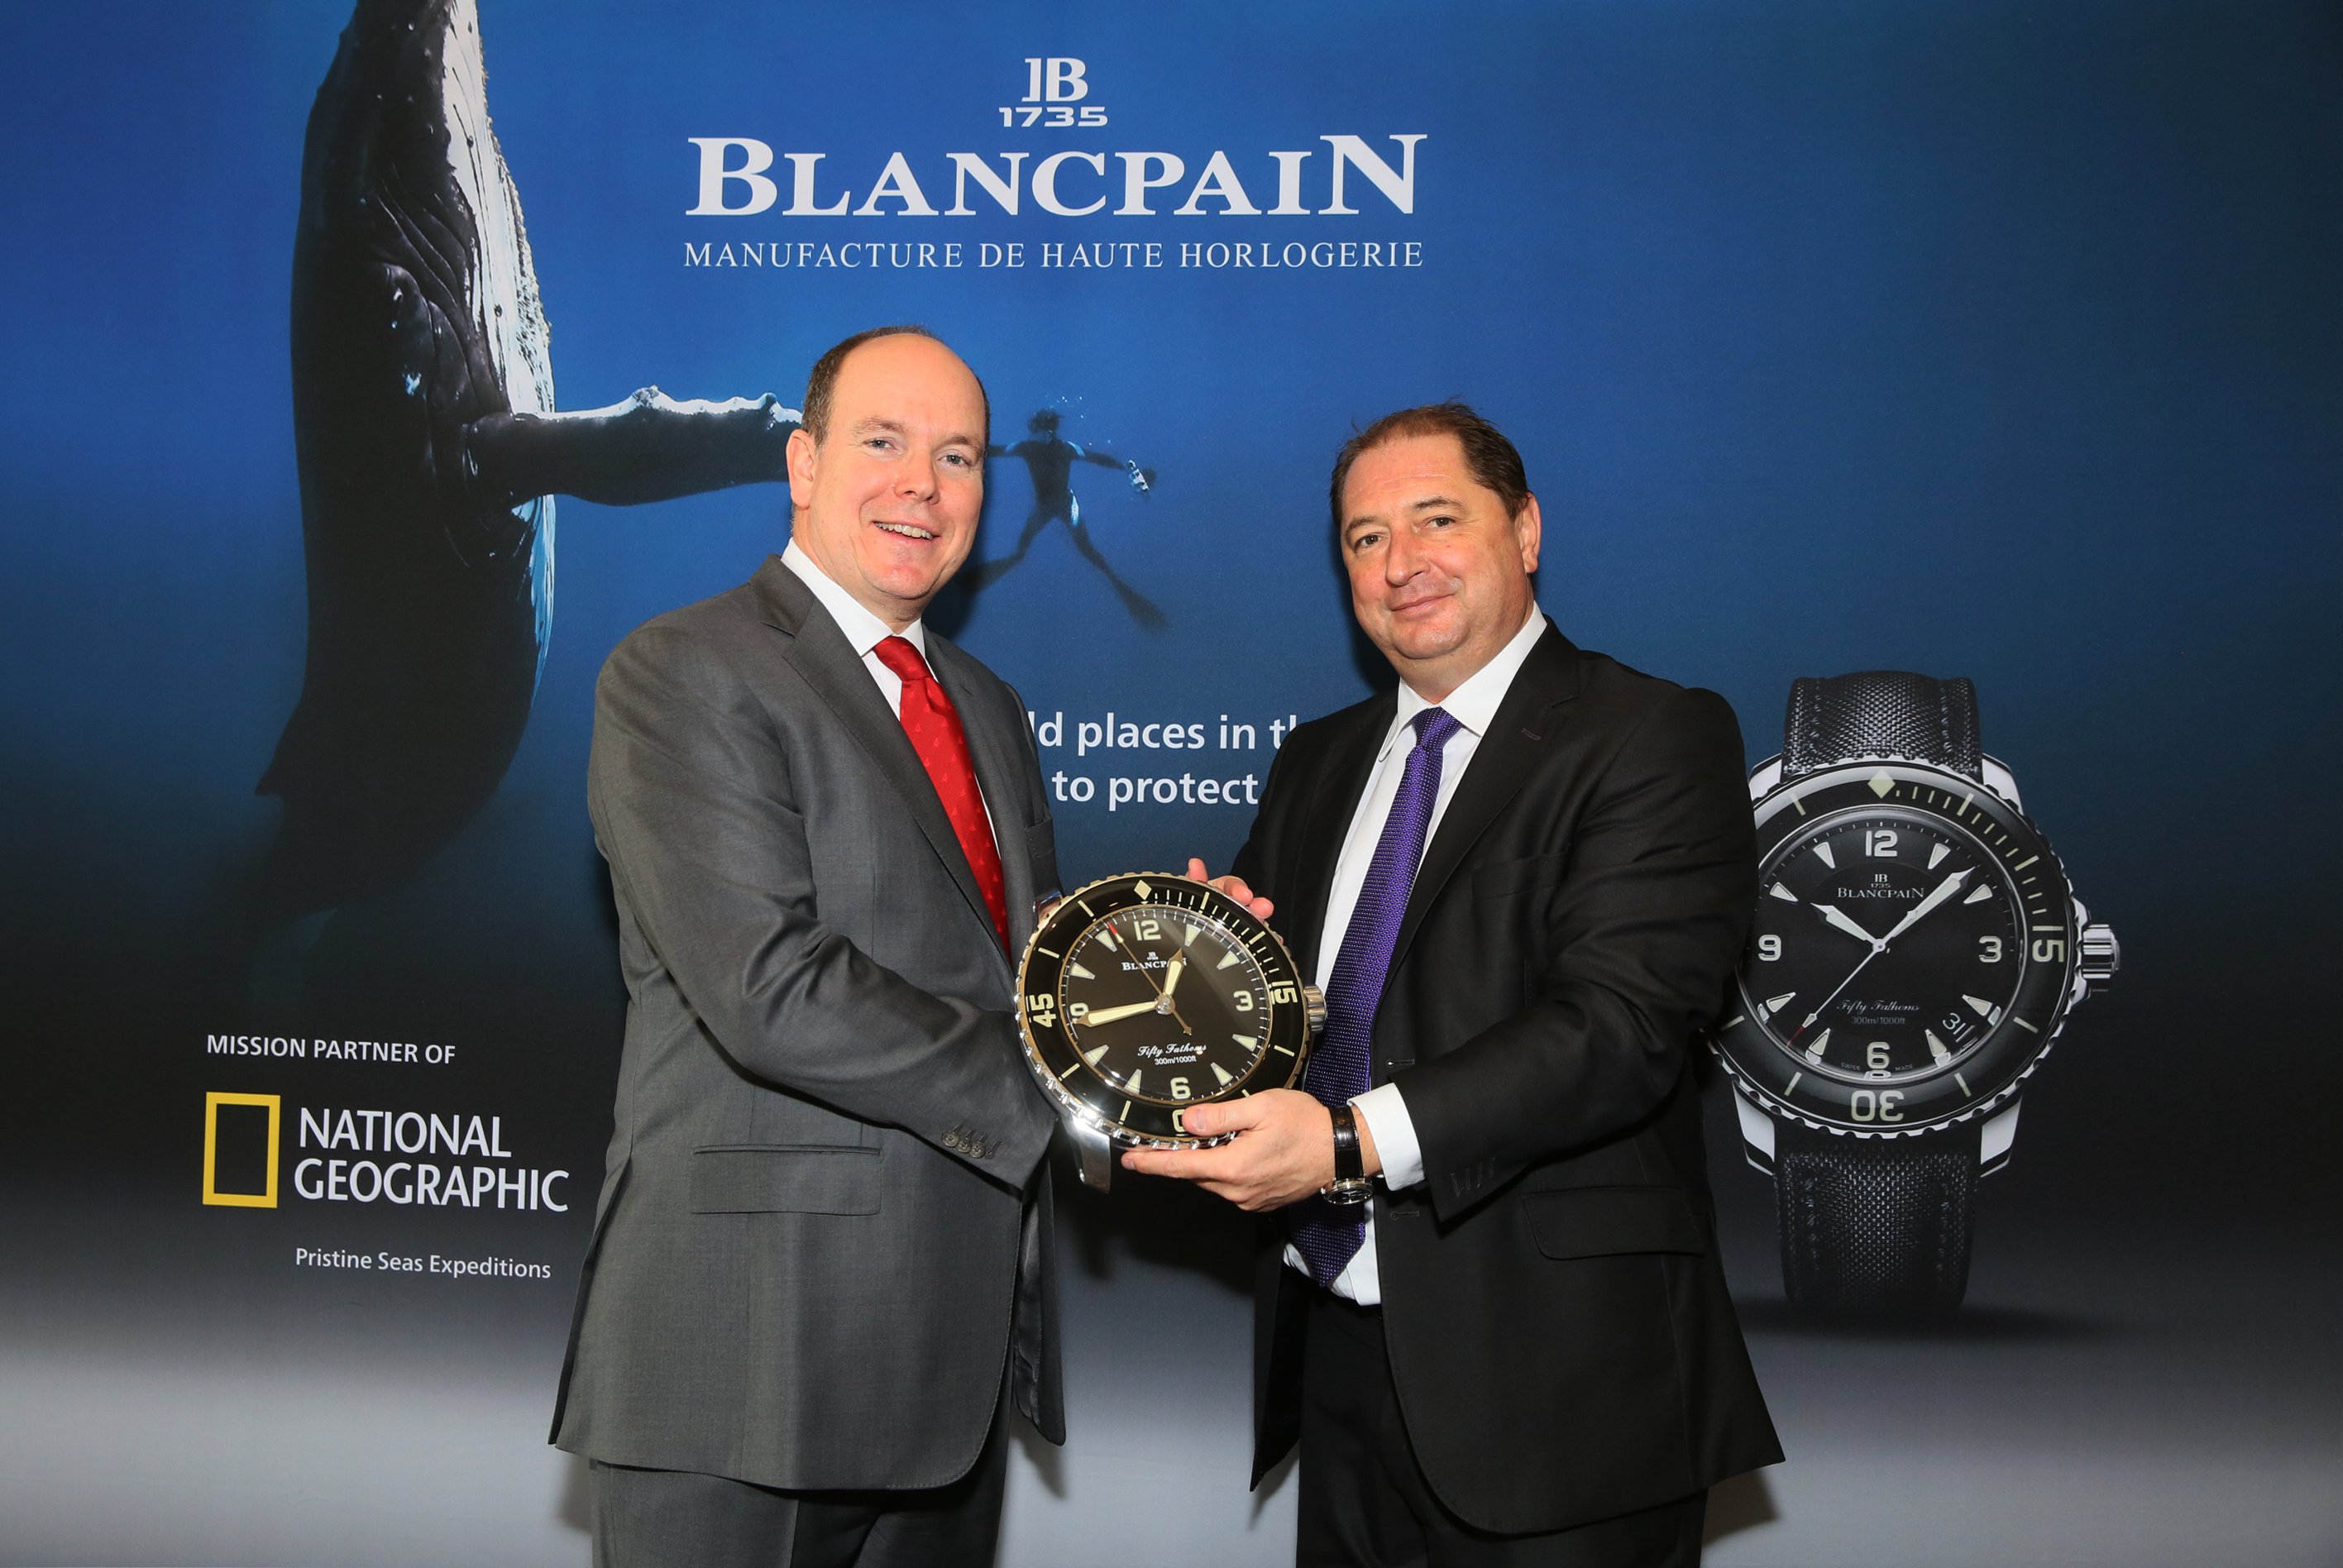 Blancpain Ocean Commitment  Working together to help protect the oceans